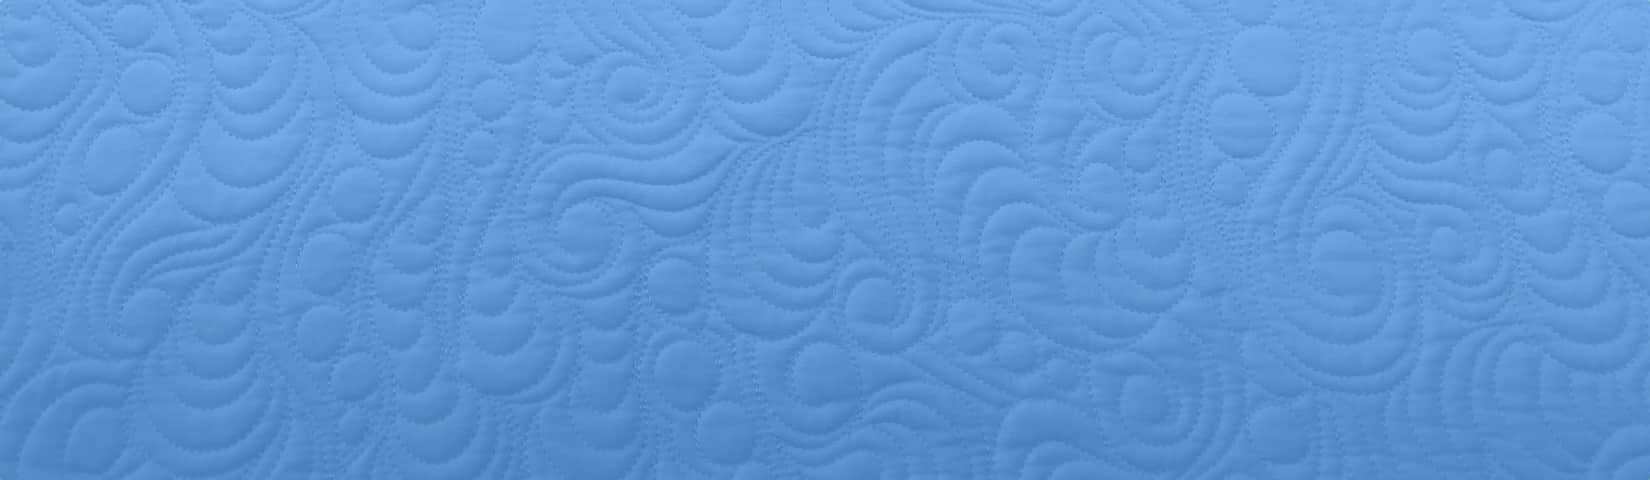 Texture of quilting on an azure background